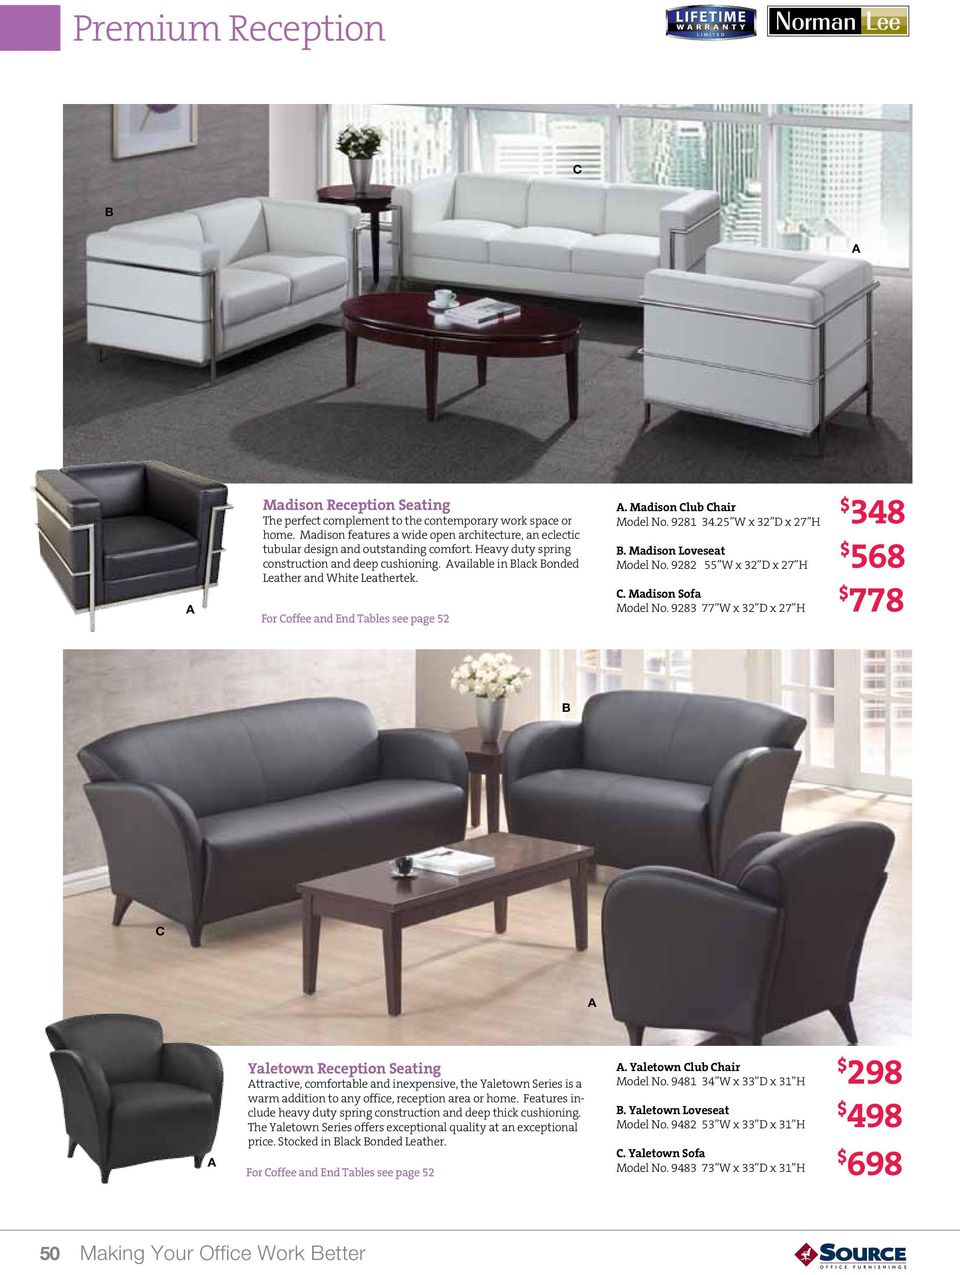 For offee and End Tables see page 52. Madison lub hair Model No. 9281 34.25 W x 32 D x 27 H. Madison Loveseat Model No. 9282 55 W x 32 D x 27 H. Madison Sofa Model No.